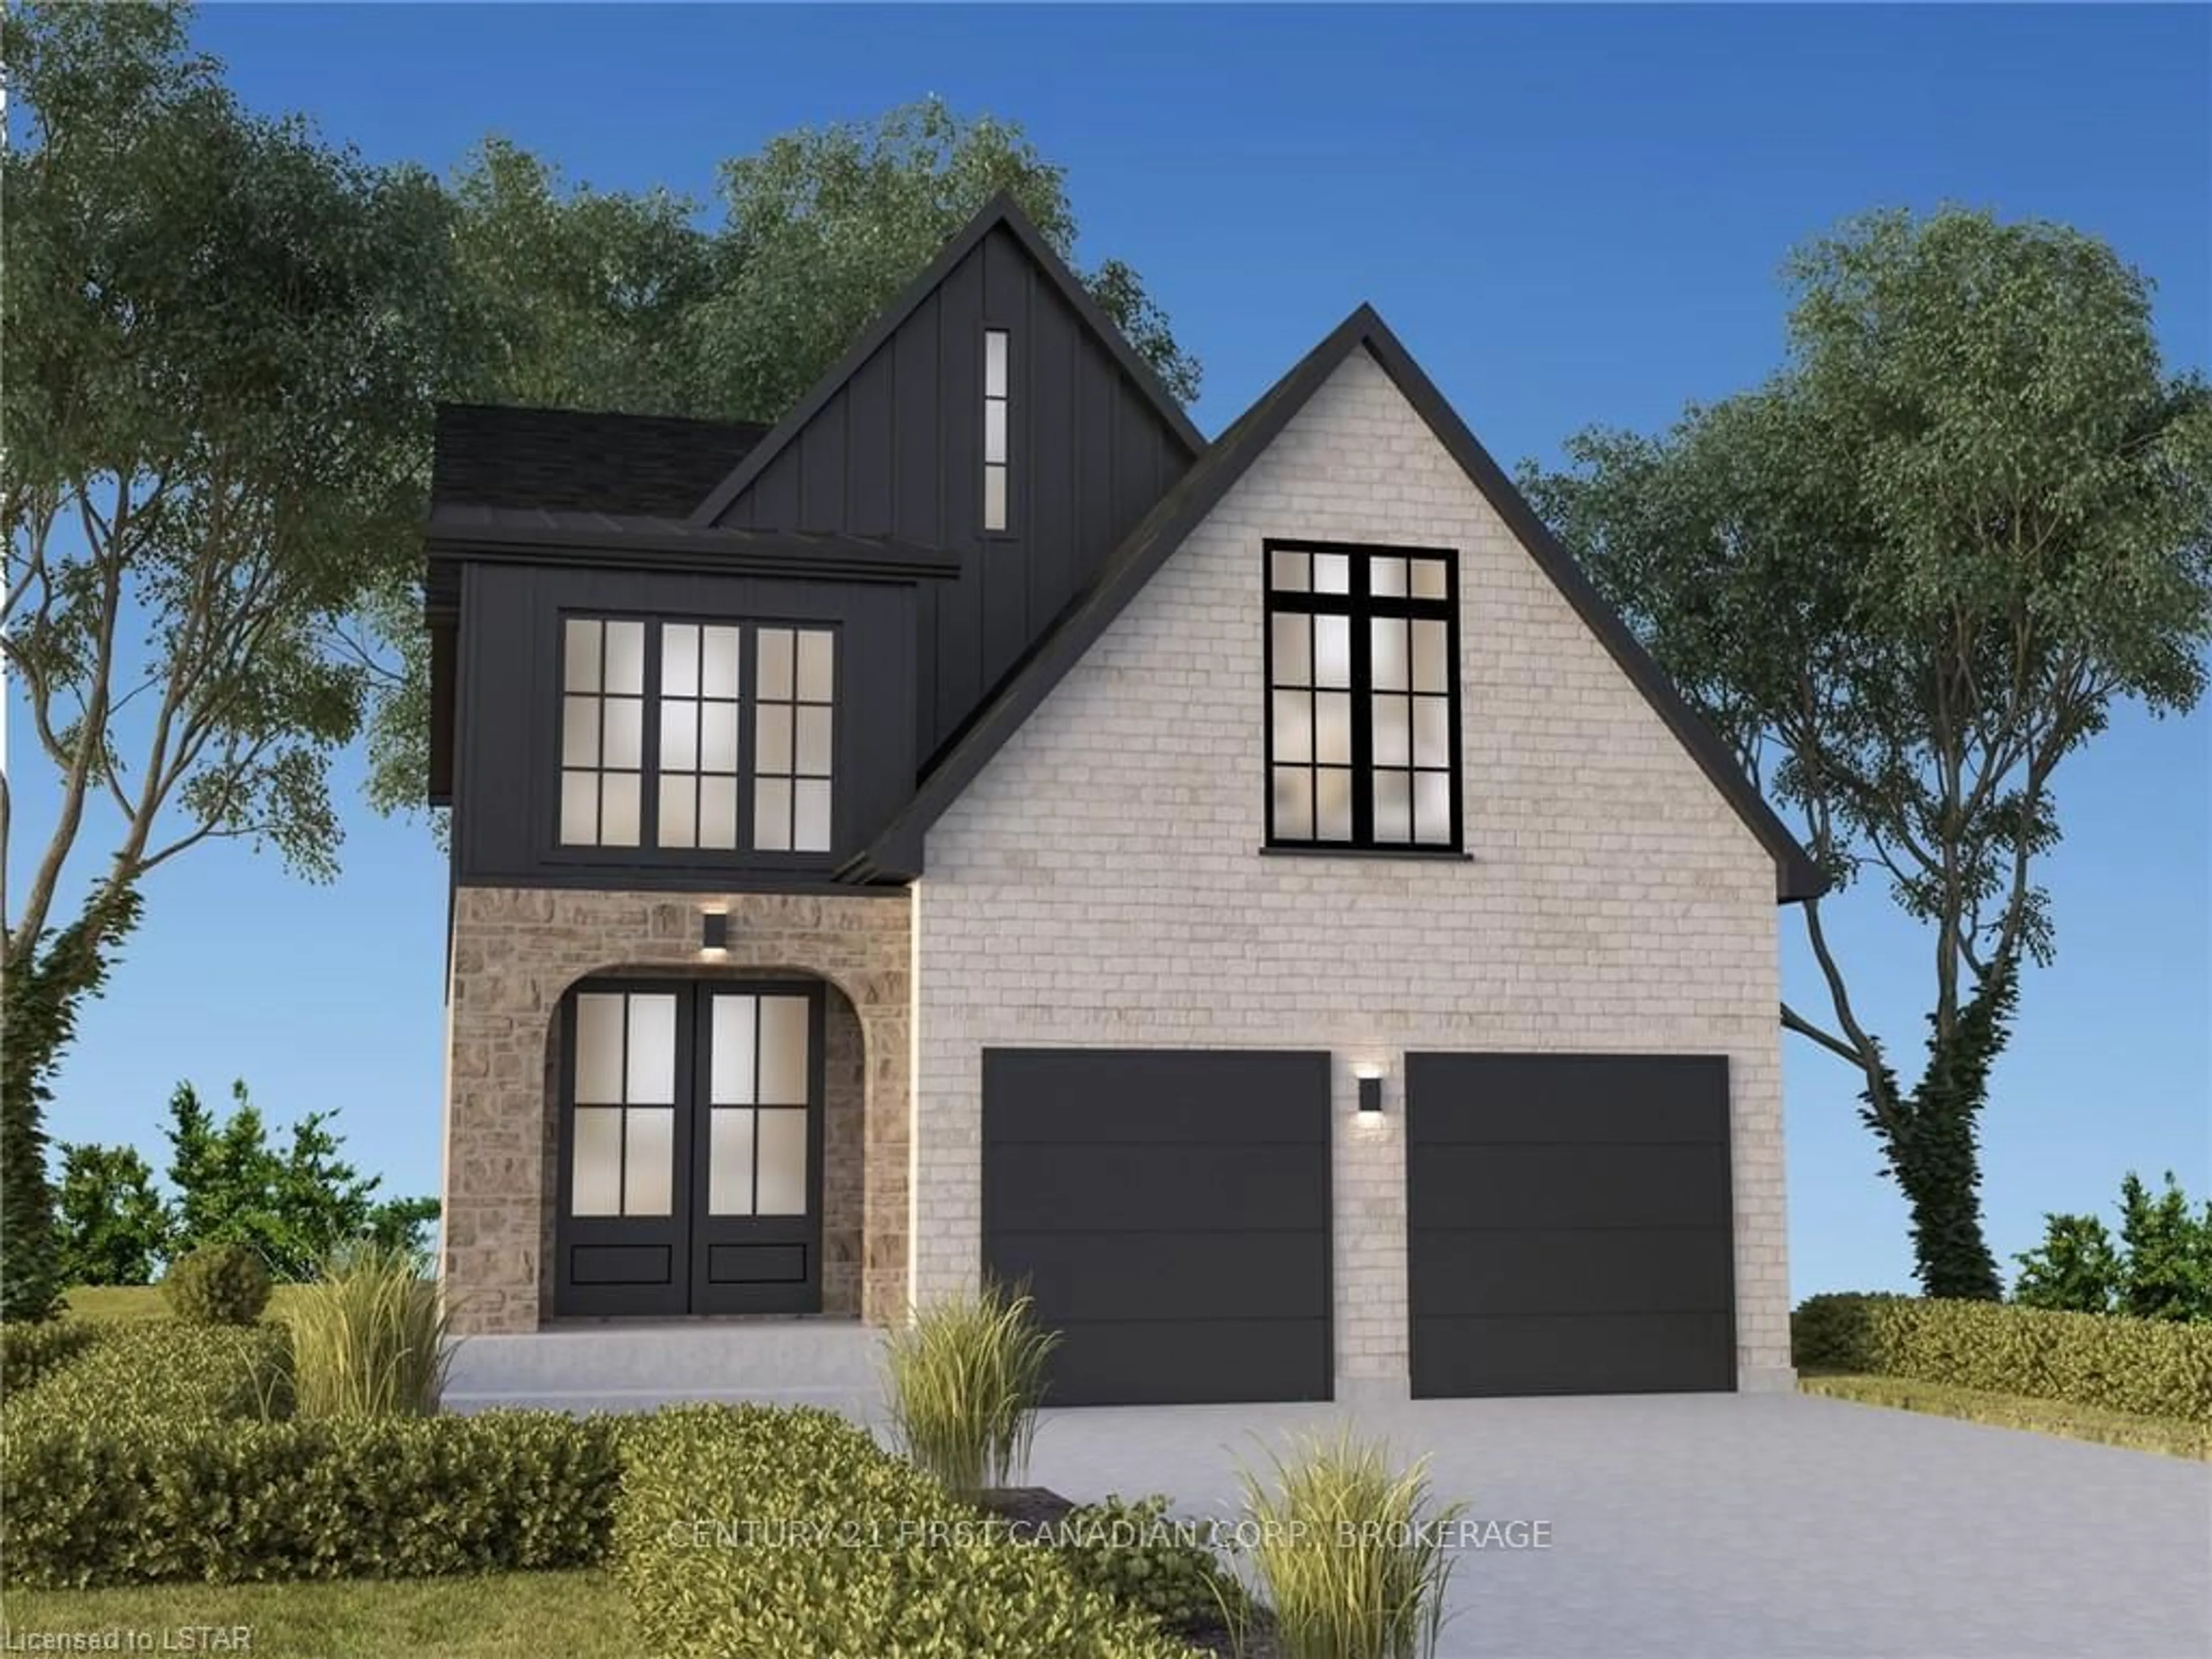 Home with brick exterior material for Lot 129 Big Leaf Tr, London Ontario N6P 1H5